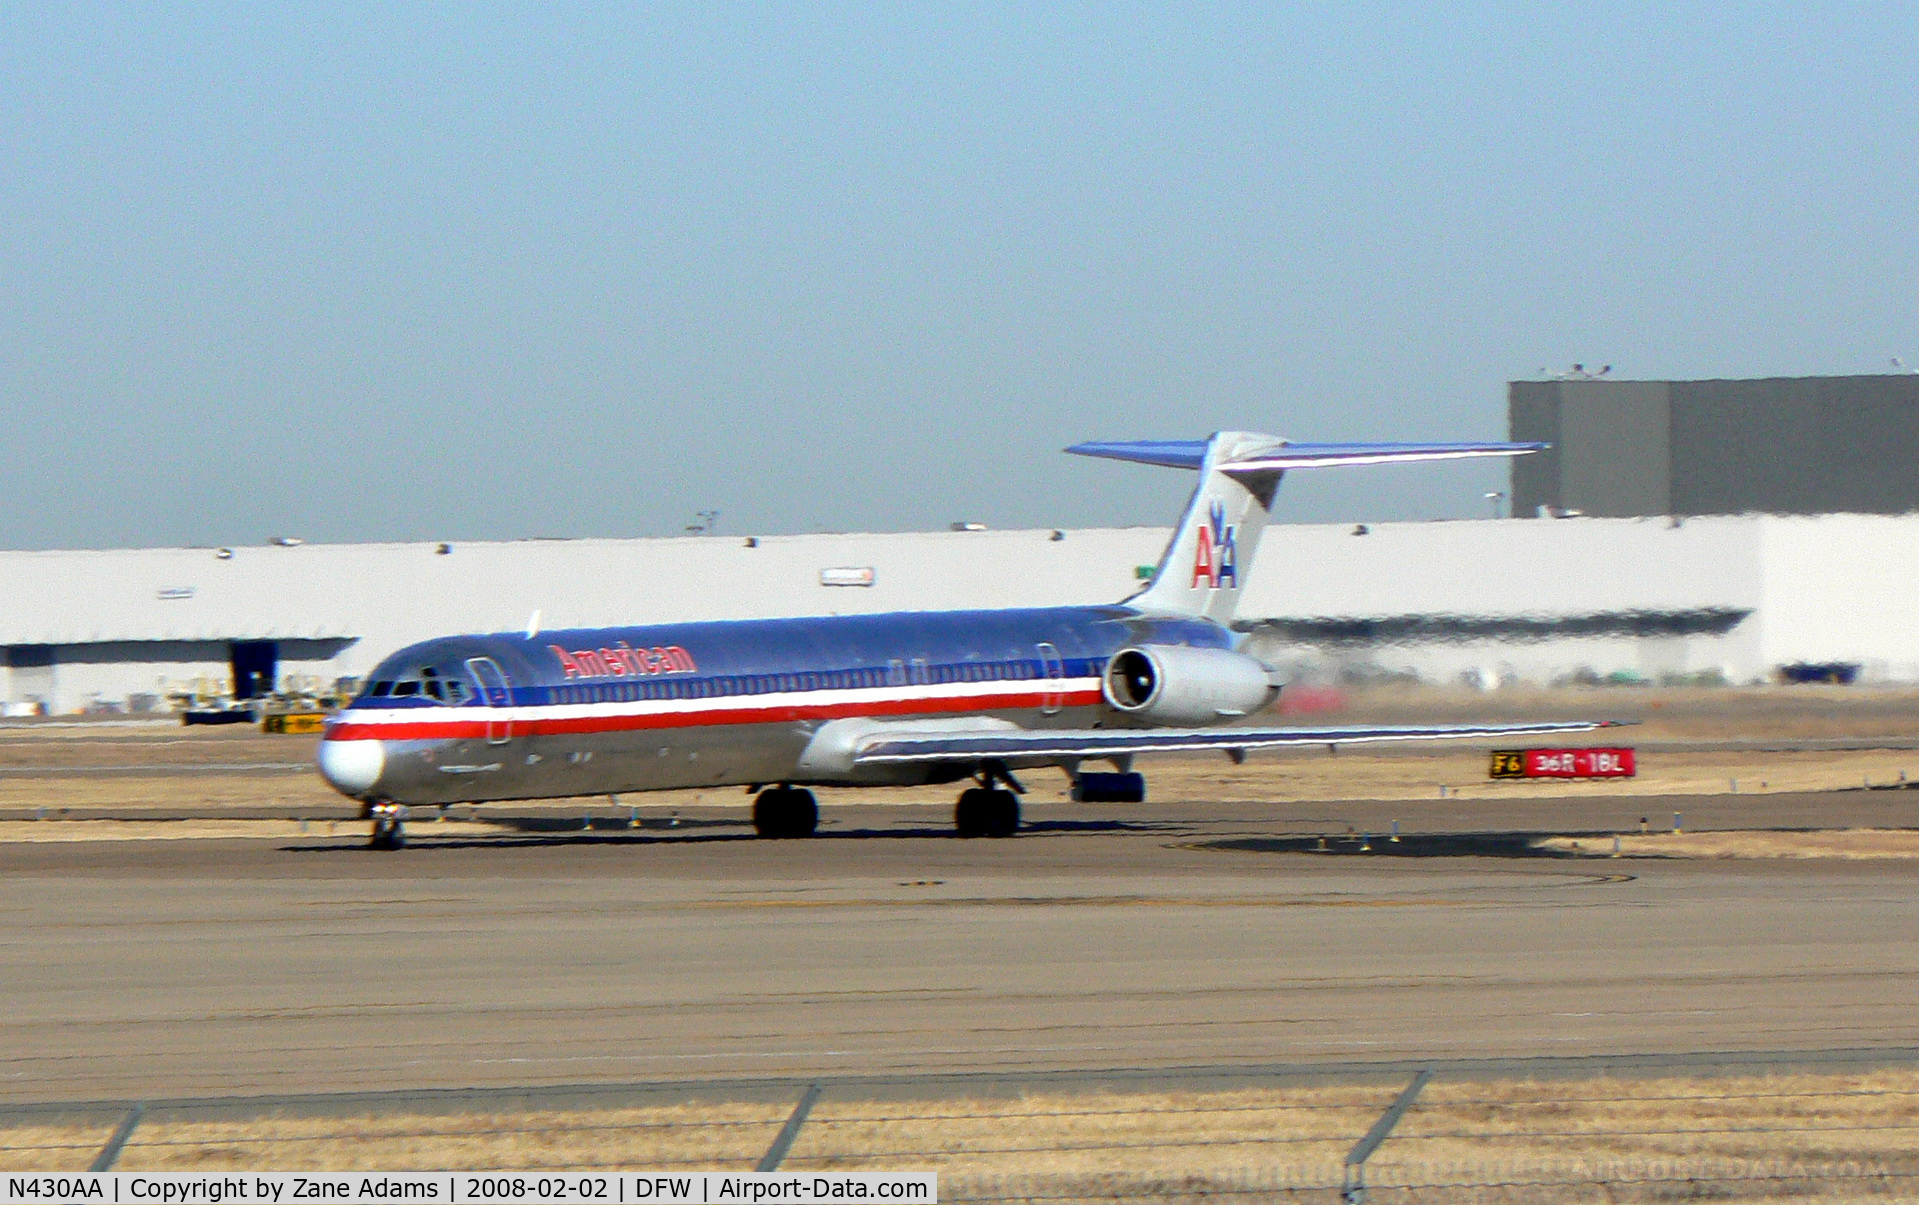 N430AA, 1986 McDonnell Douglas MD-82 (DC-9-82) C/N 49342, American Airlines at DFW